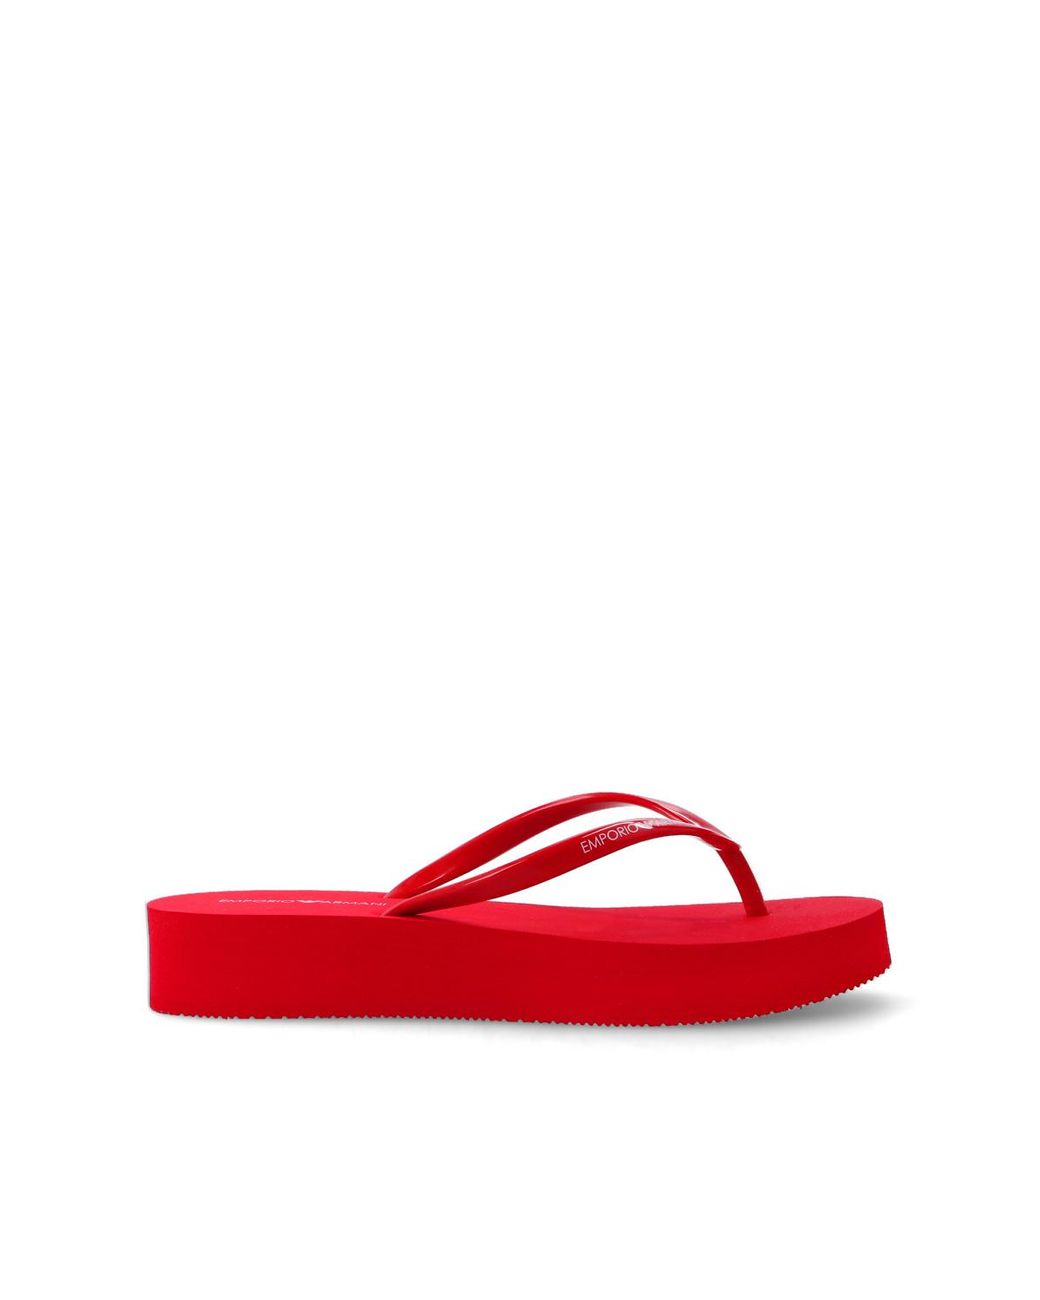 Emporio Armani Rubber Wedge Flip-flops Red - Lyst